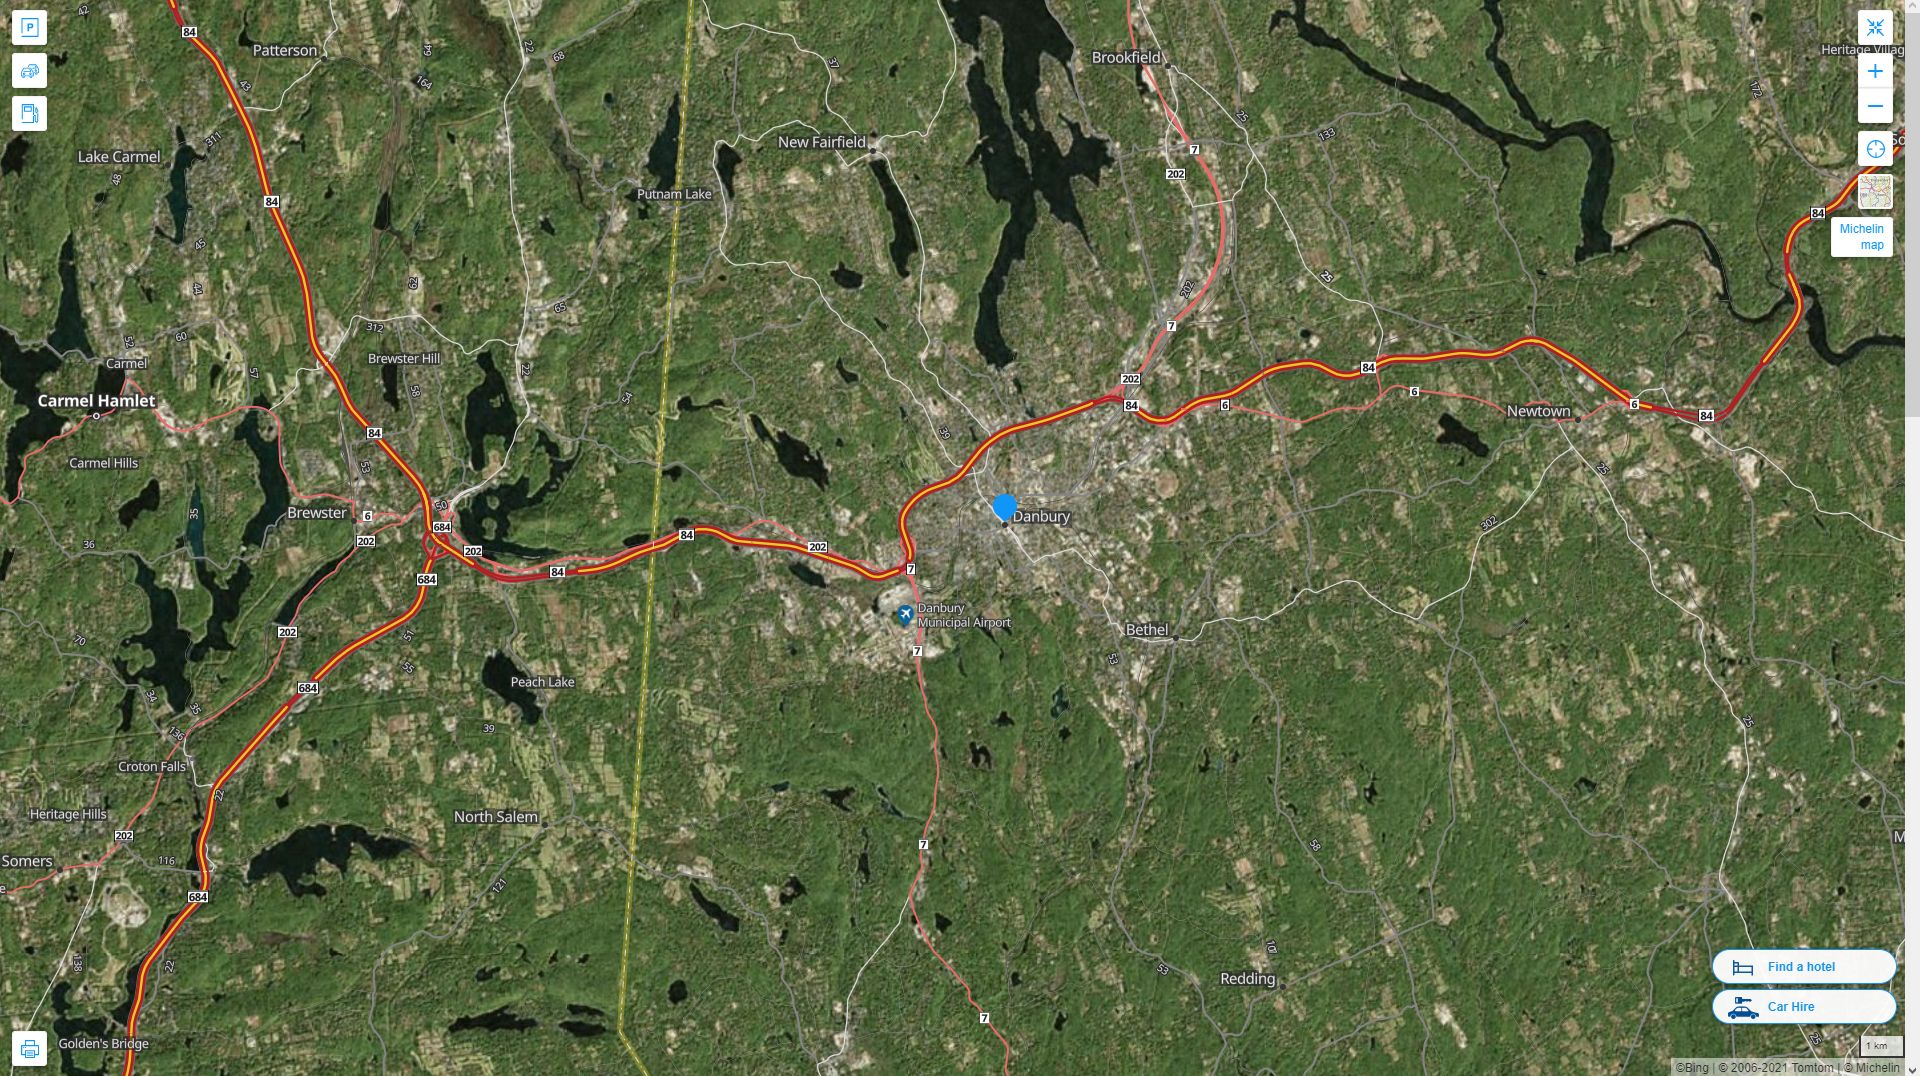 Danbury Connecticut Highway and Road Map with Satellite View